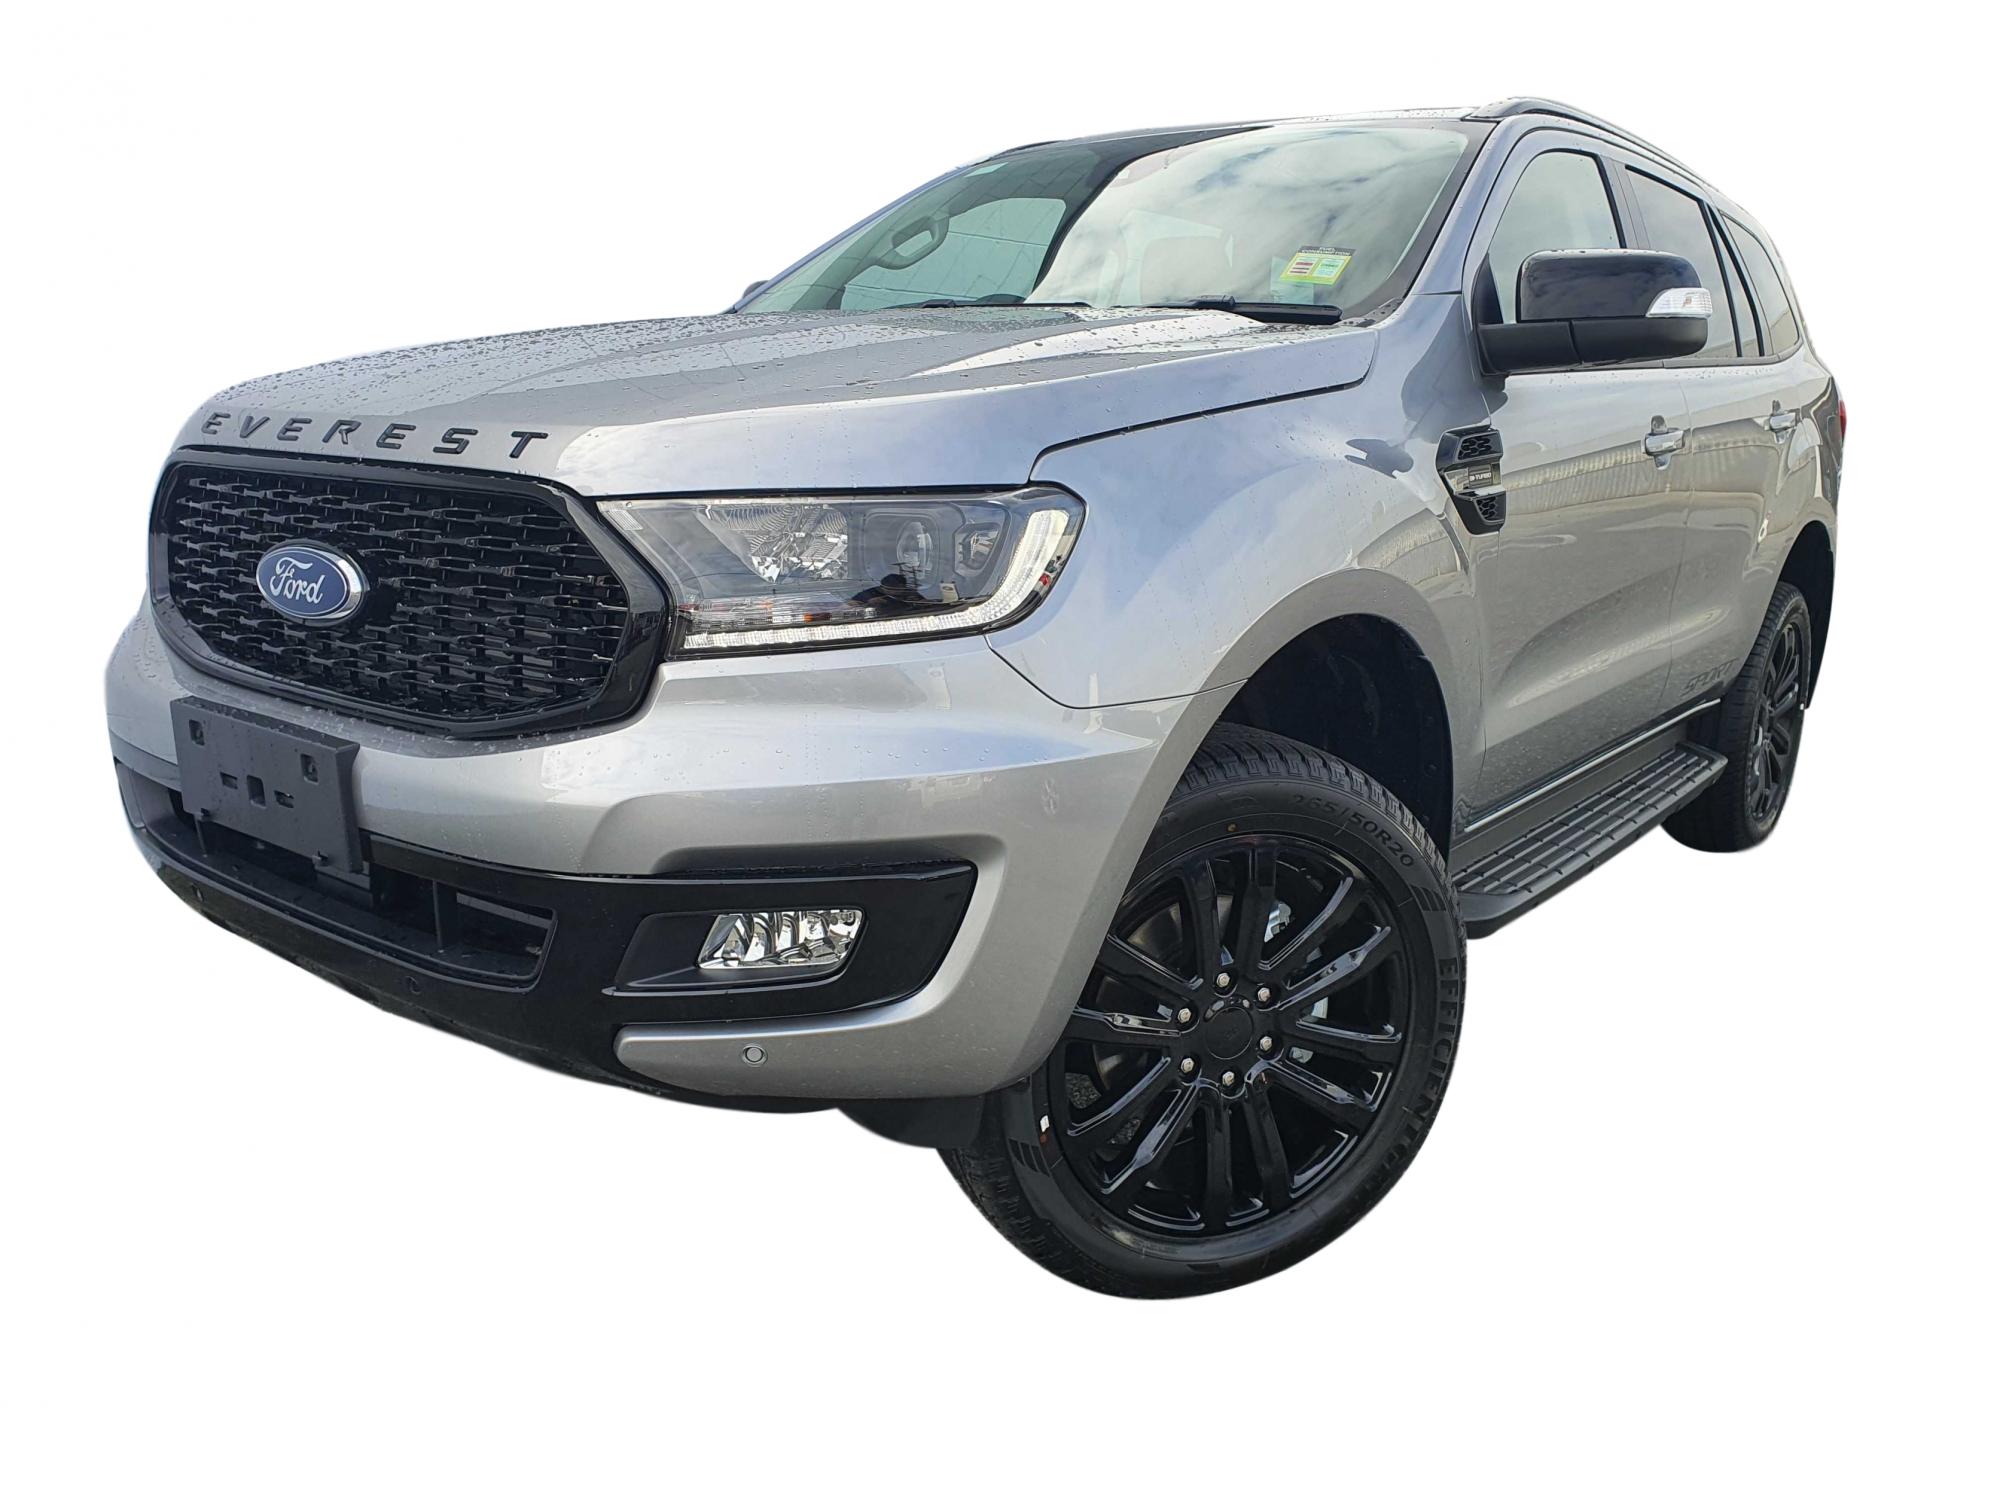 2020 Ford EVEREST SUV SPORT 2.0D 10A on handshake